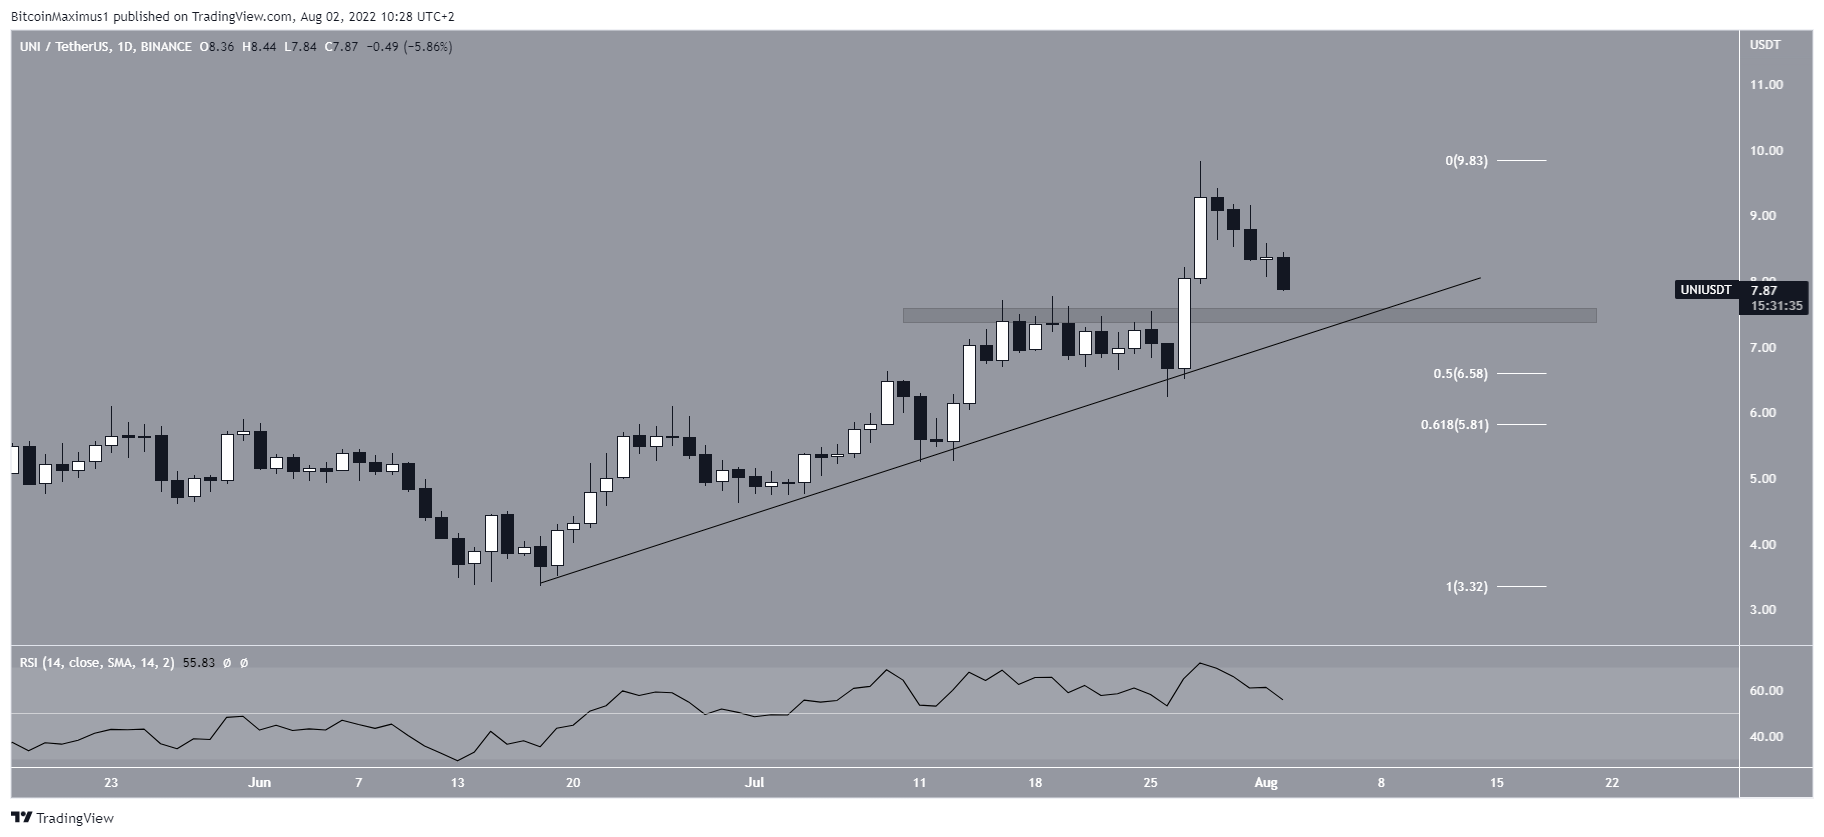 Daily ascending support line